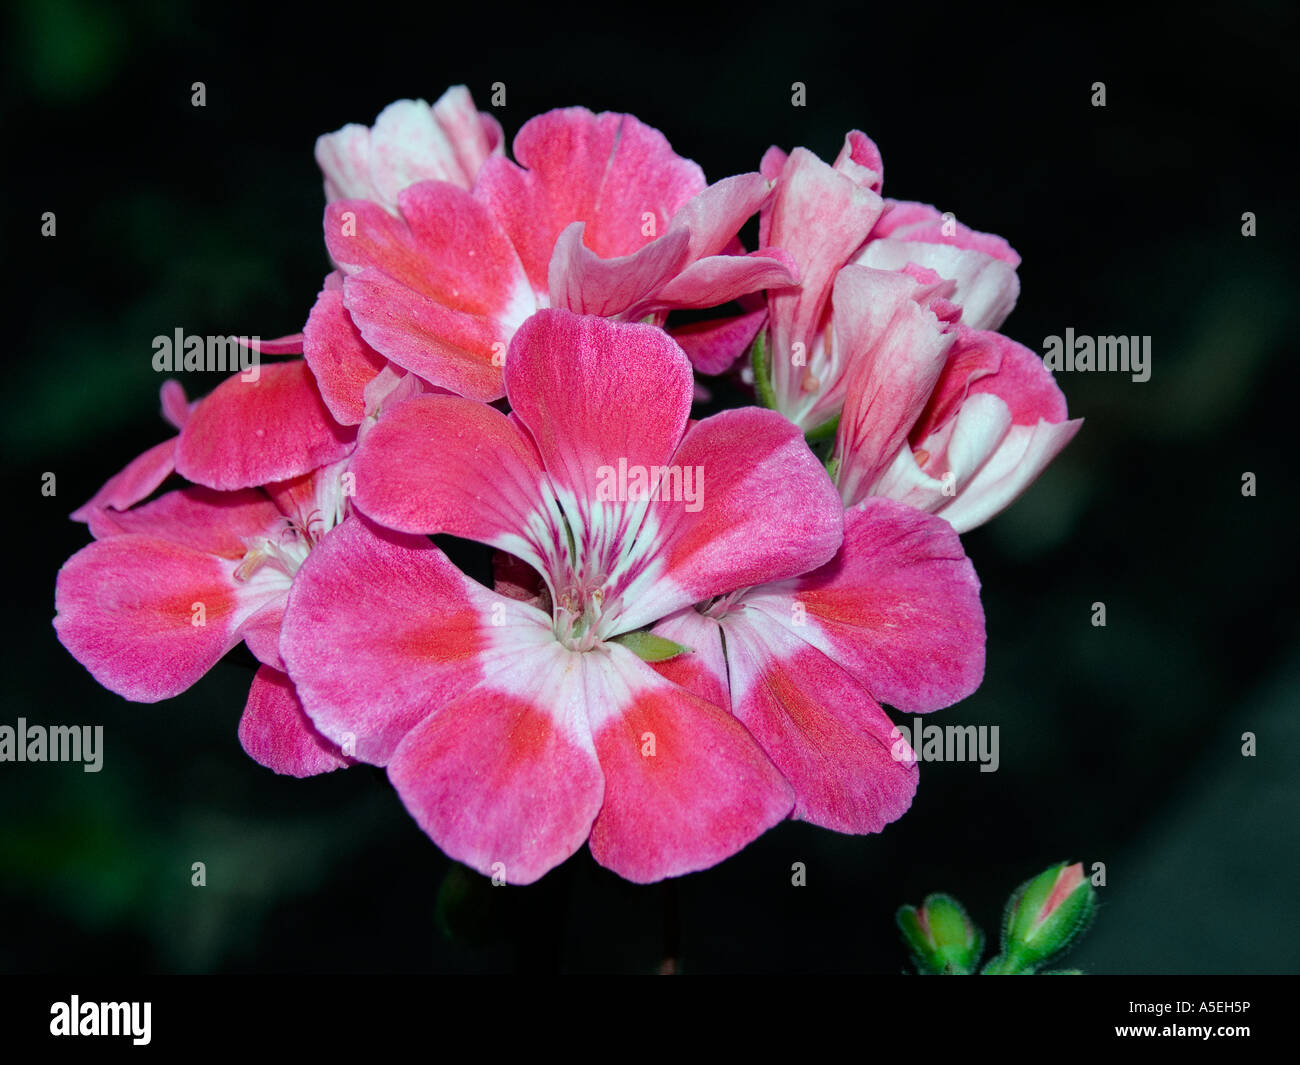 Cluster of stunning and unusual pink and white flowers and buds of Geranium Florever series against a black background Stock Photo